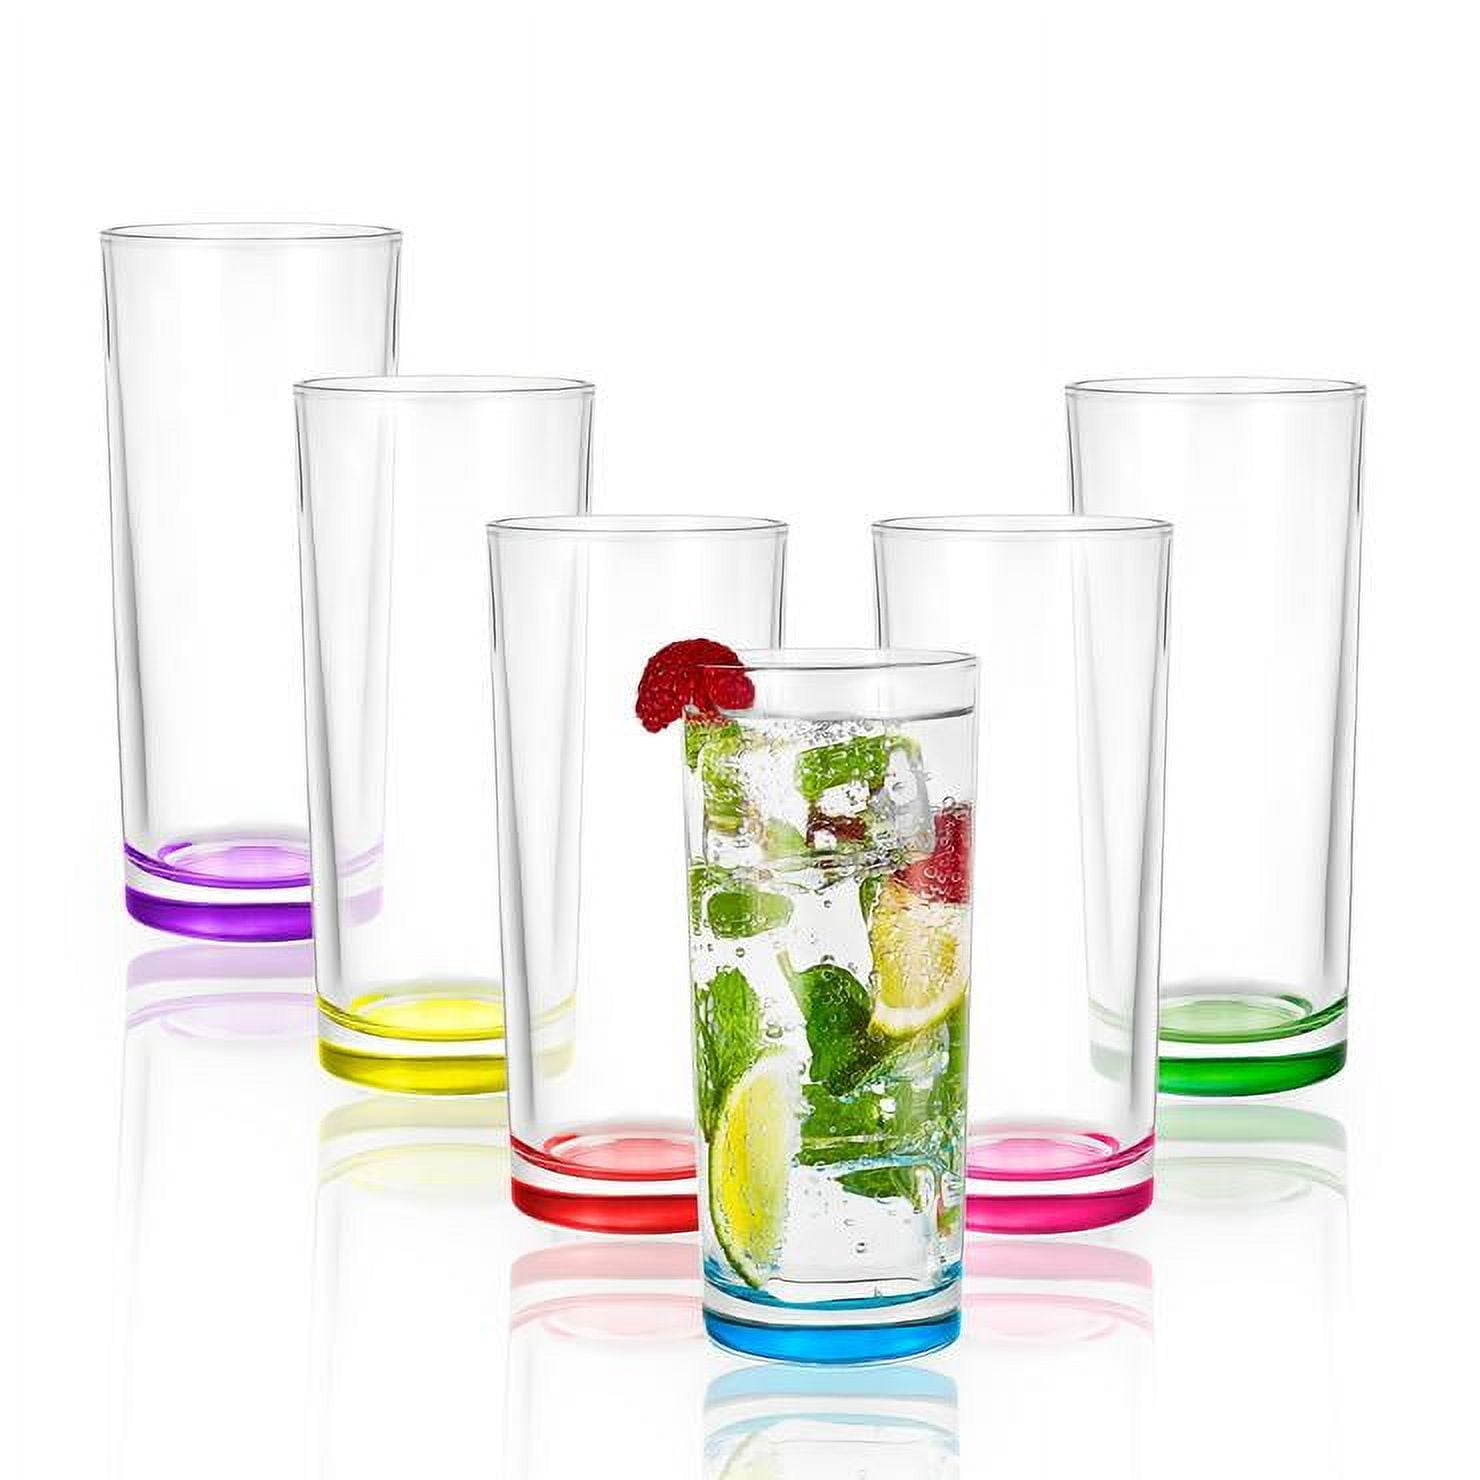 Claplante Crystal Highball Glasses, 6 Pack Glass Drinking Glasses, 11 oz  Durable Drinkware Cups for …See more Claplante Crystal Highball Glasses, 6